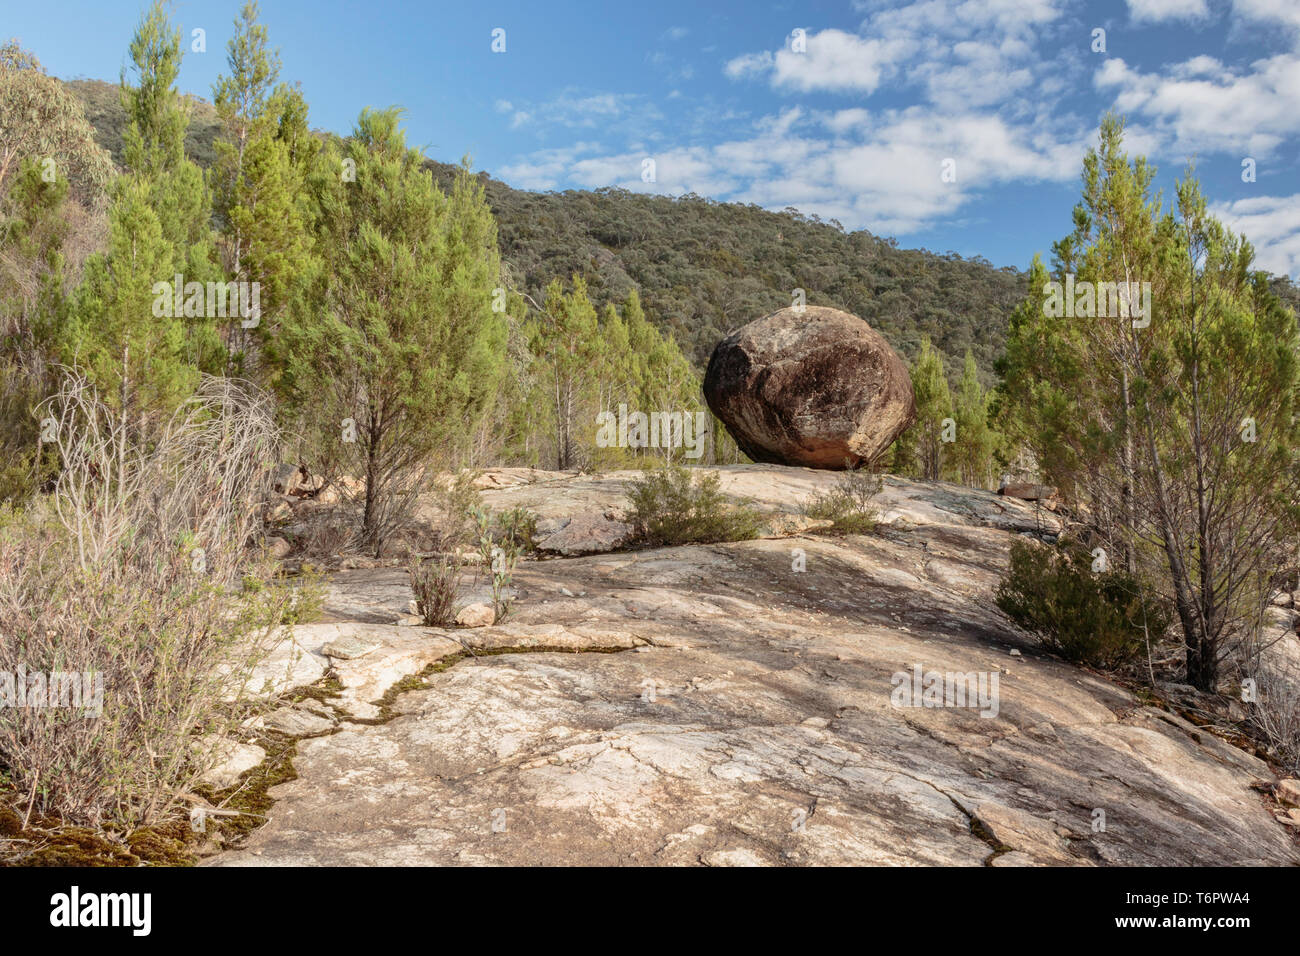 The boulder on top of Cypress Pine Lookout at Namadgi National Park, Canberra, Australia on a morning in April 2019 Stock Photo